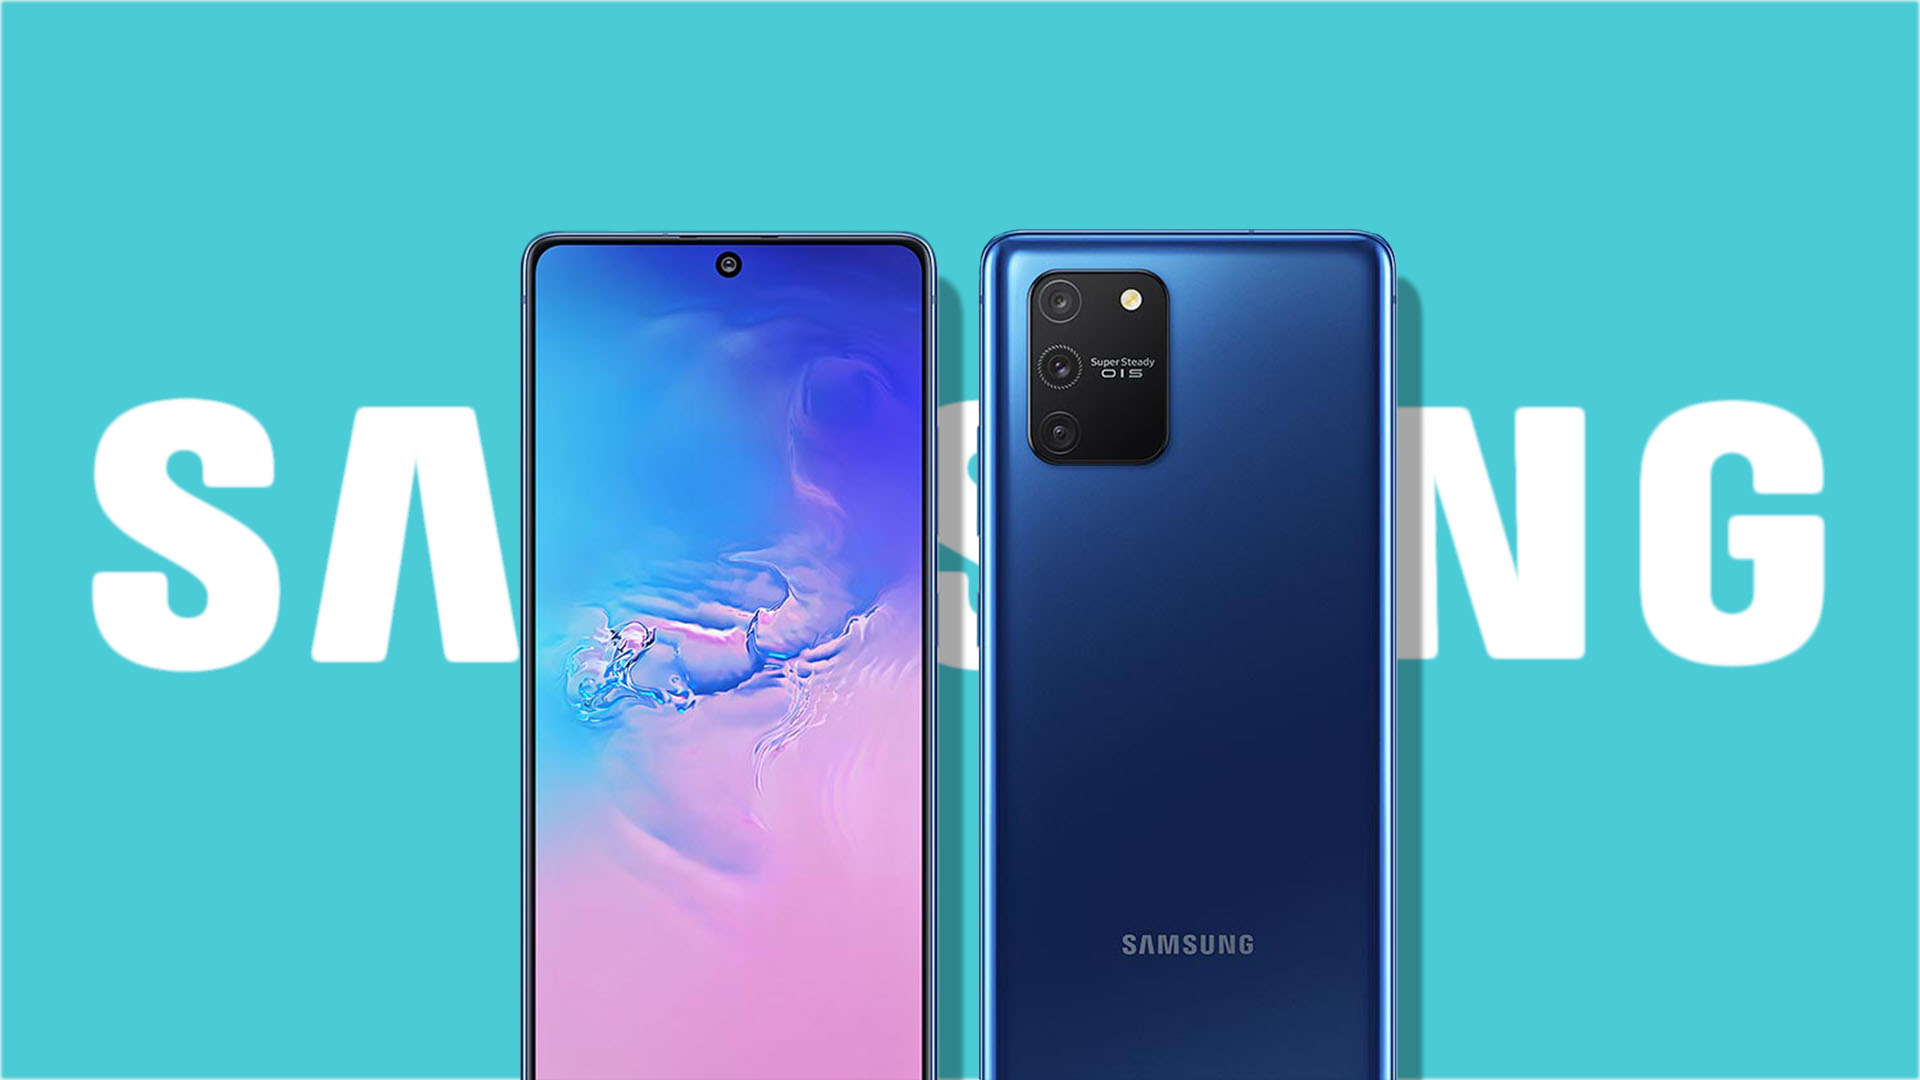 Samsung brings us a 512GB model for the Galaxy S10 Lite